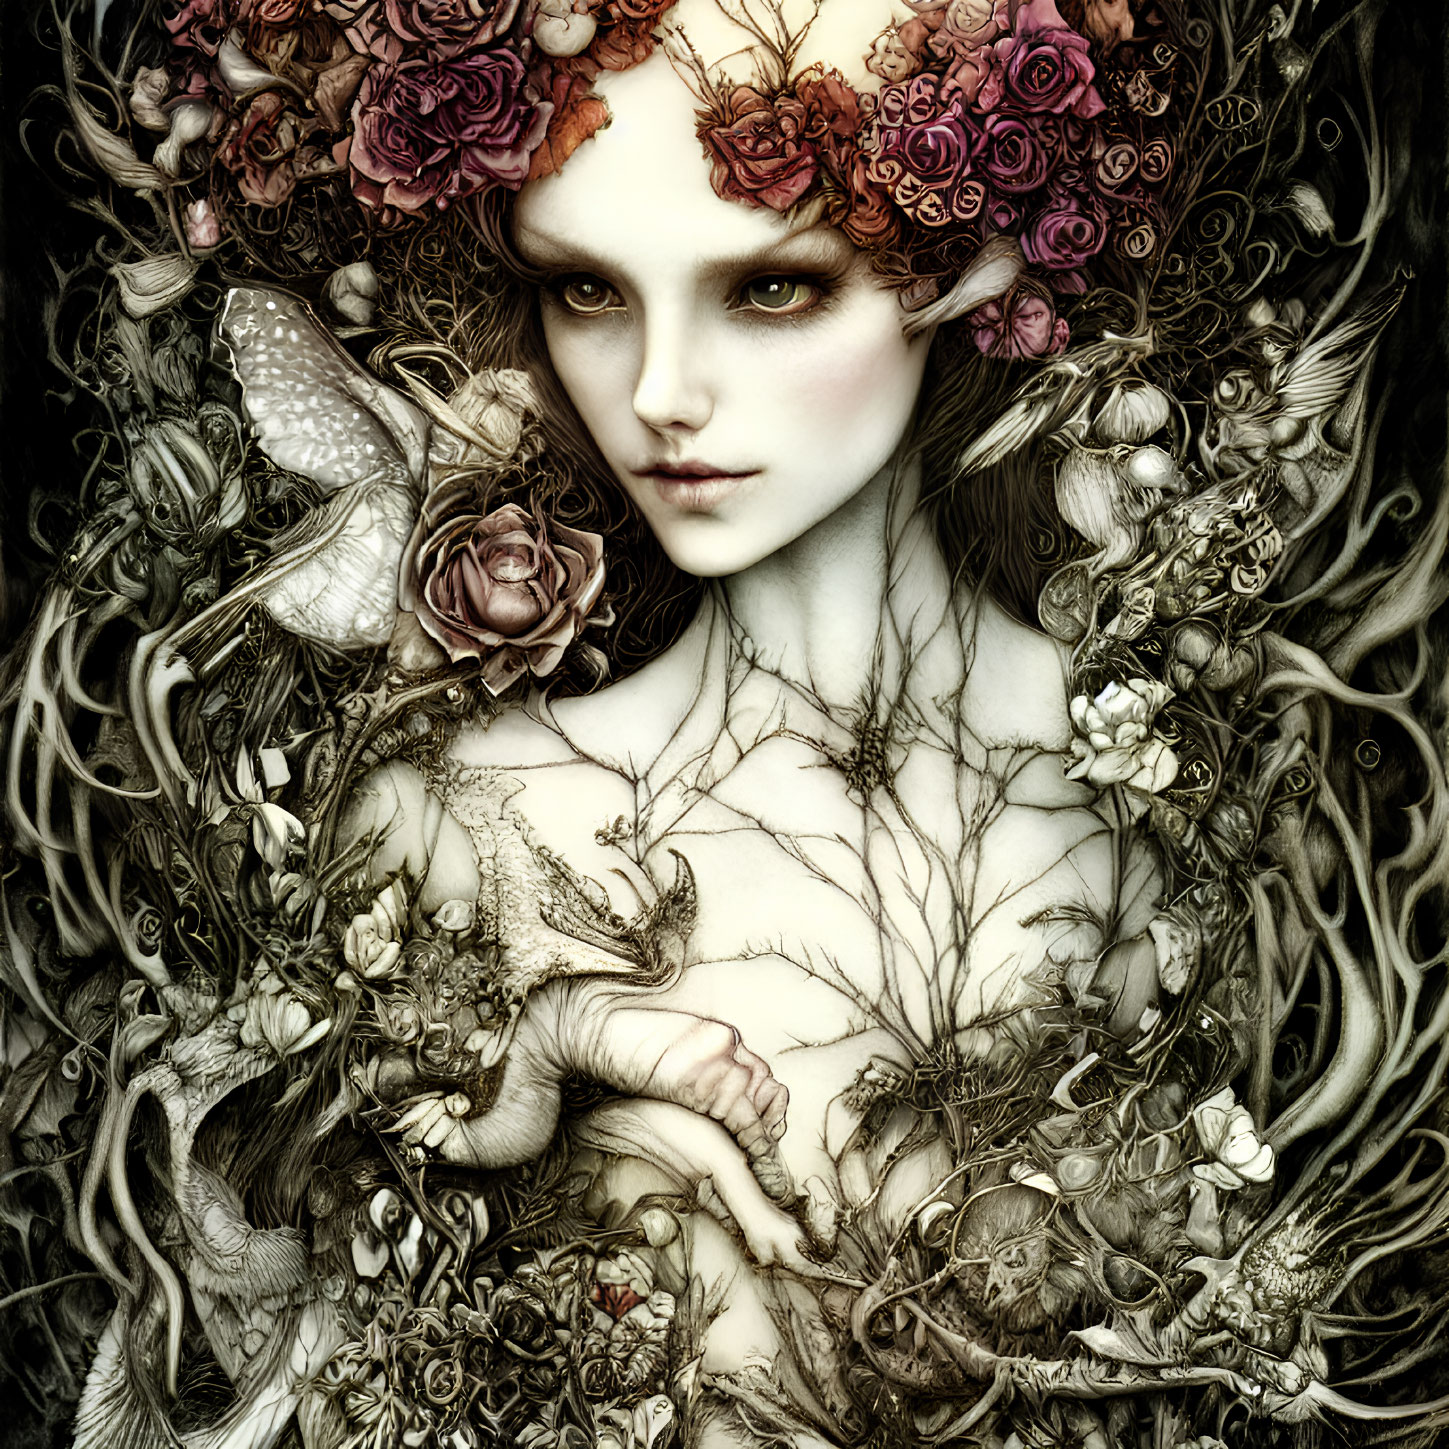 Detailed Fairytale Female Figure Surrounded by Roses and Thorns